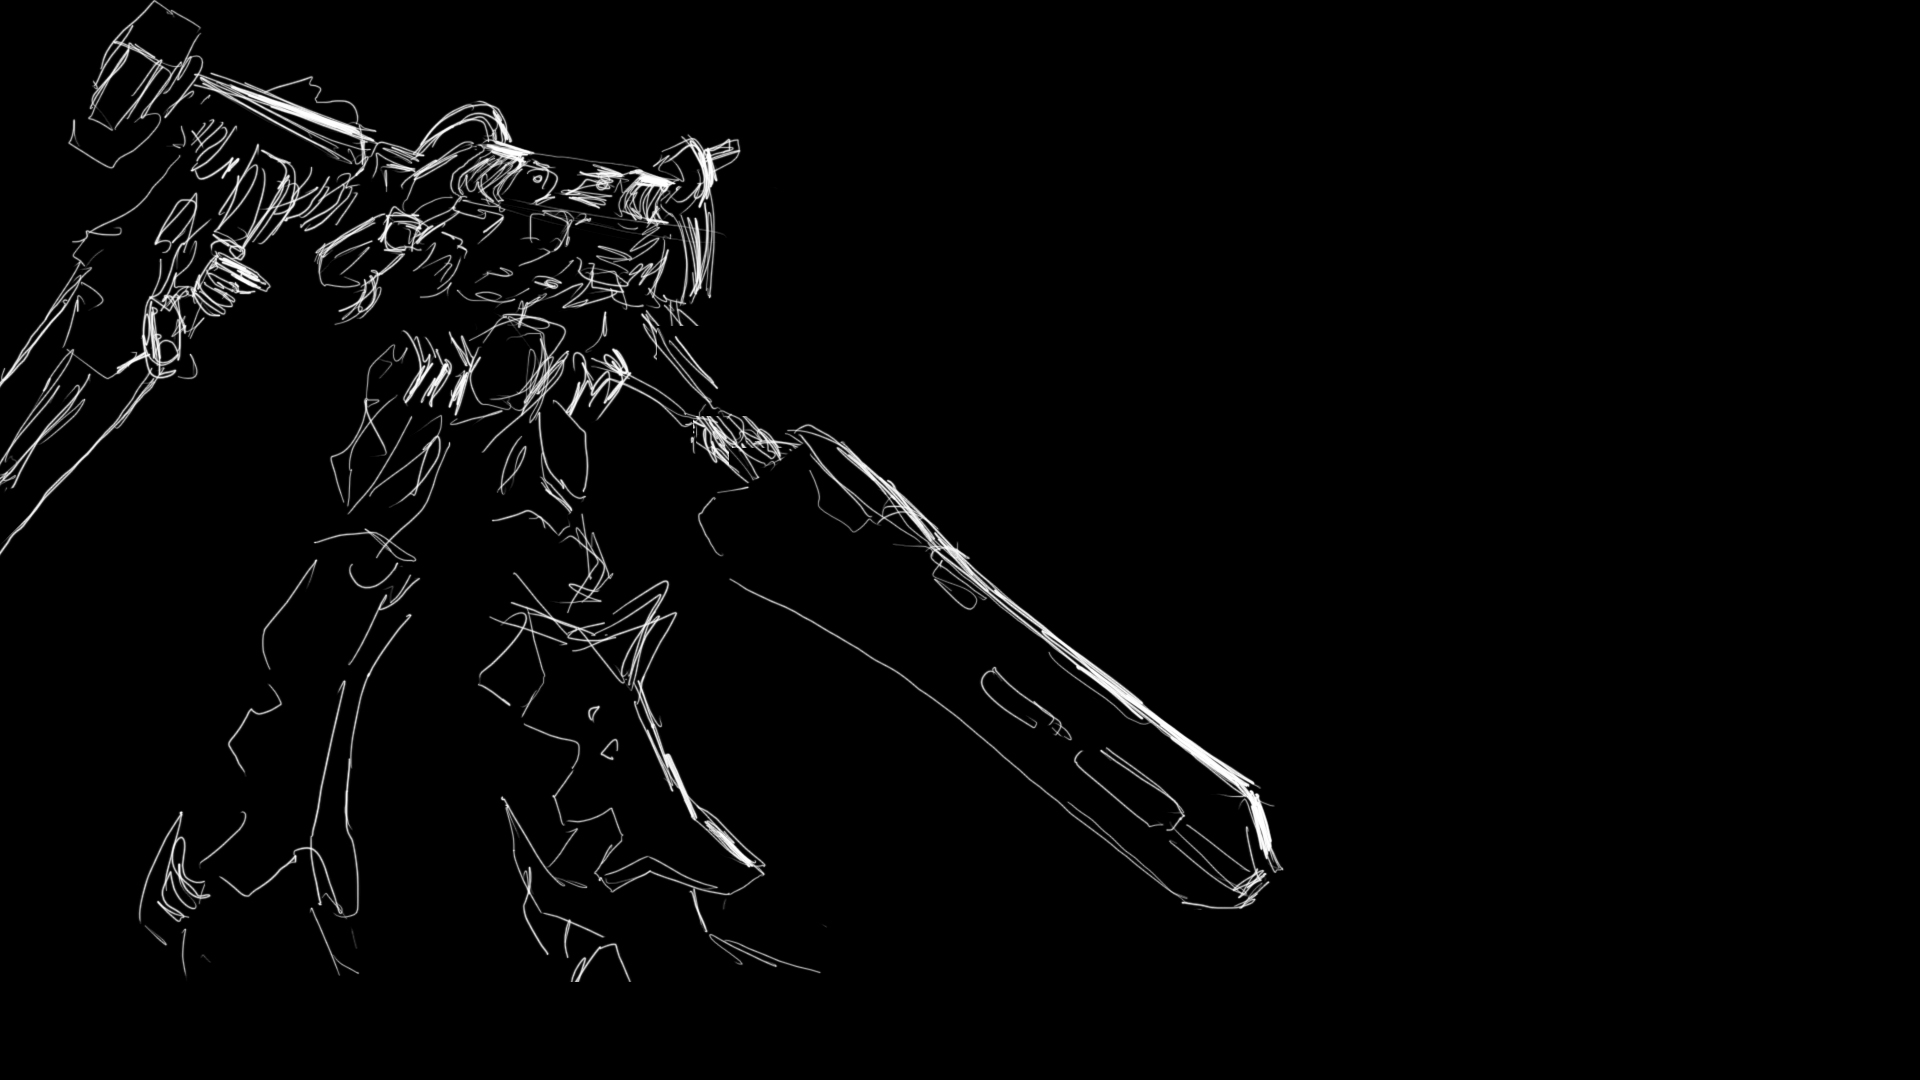 Video Game Armored Core 1920x1080